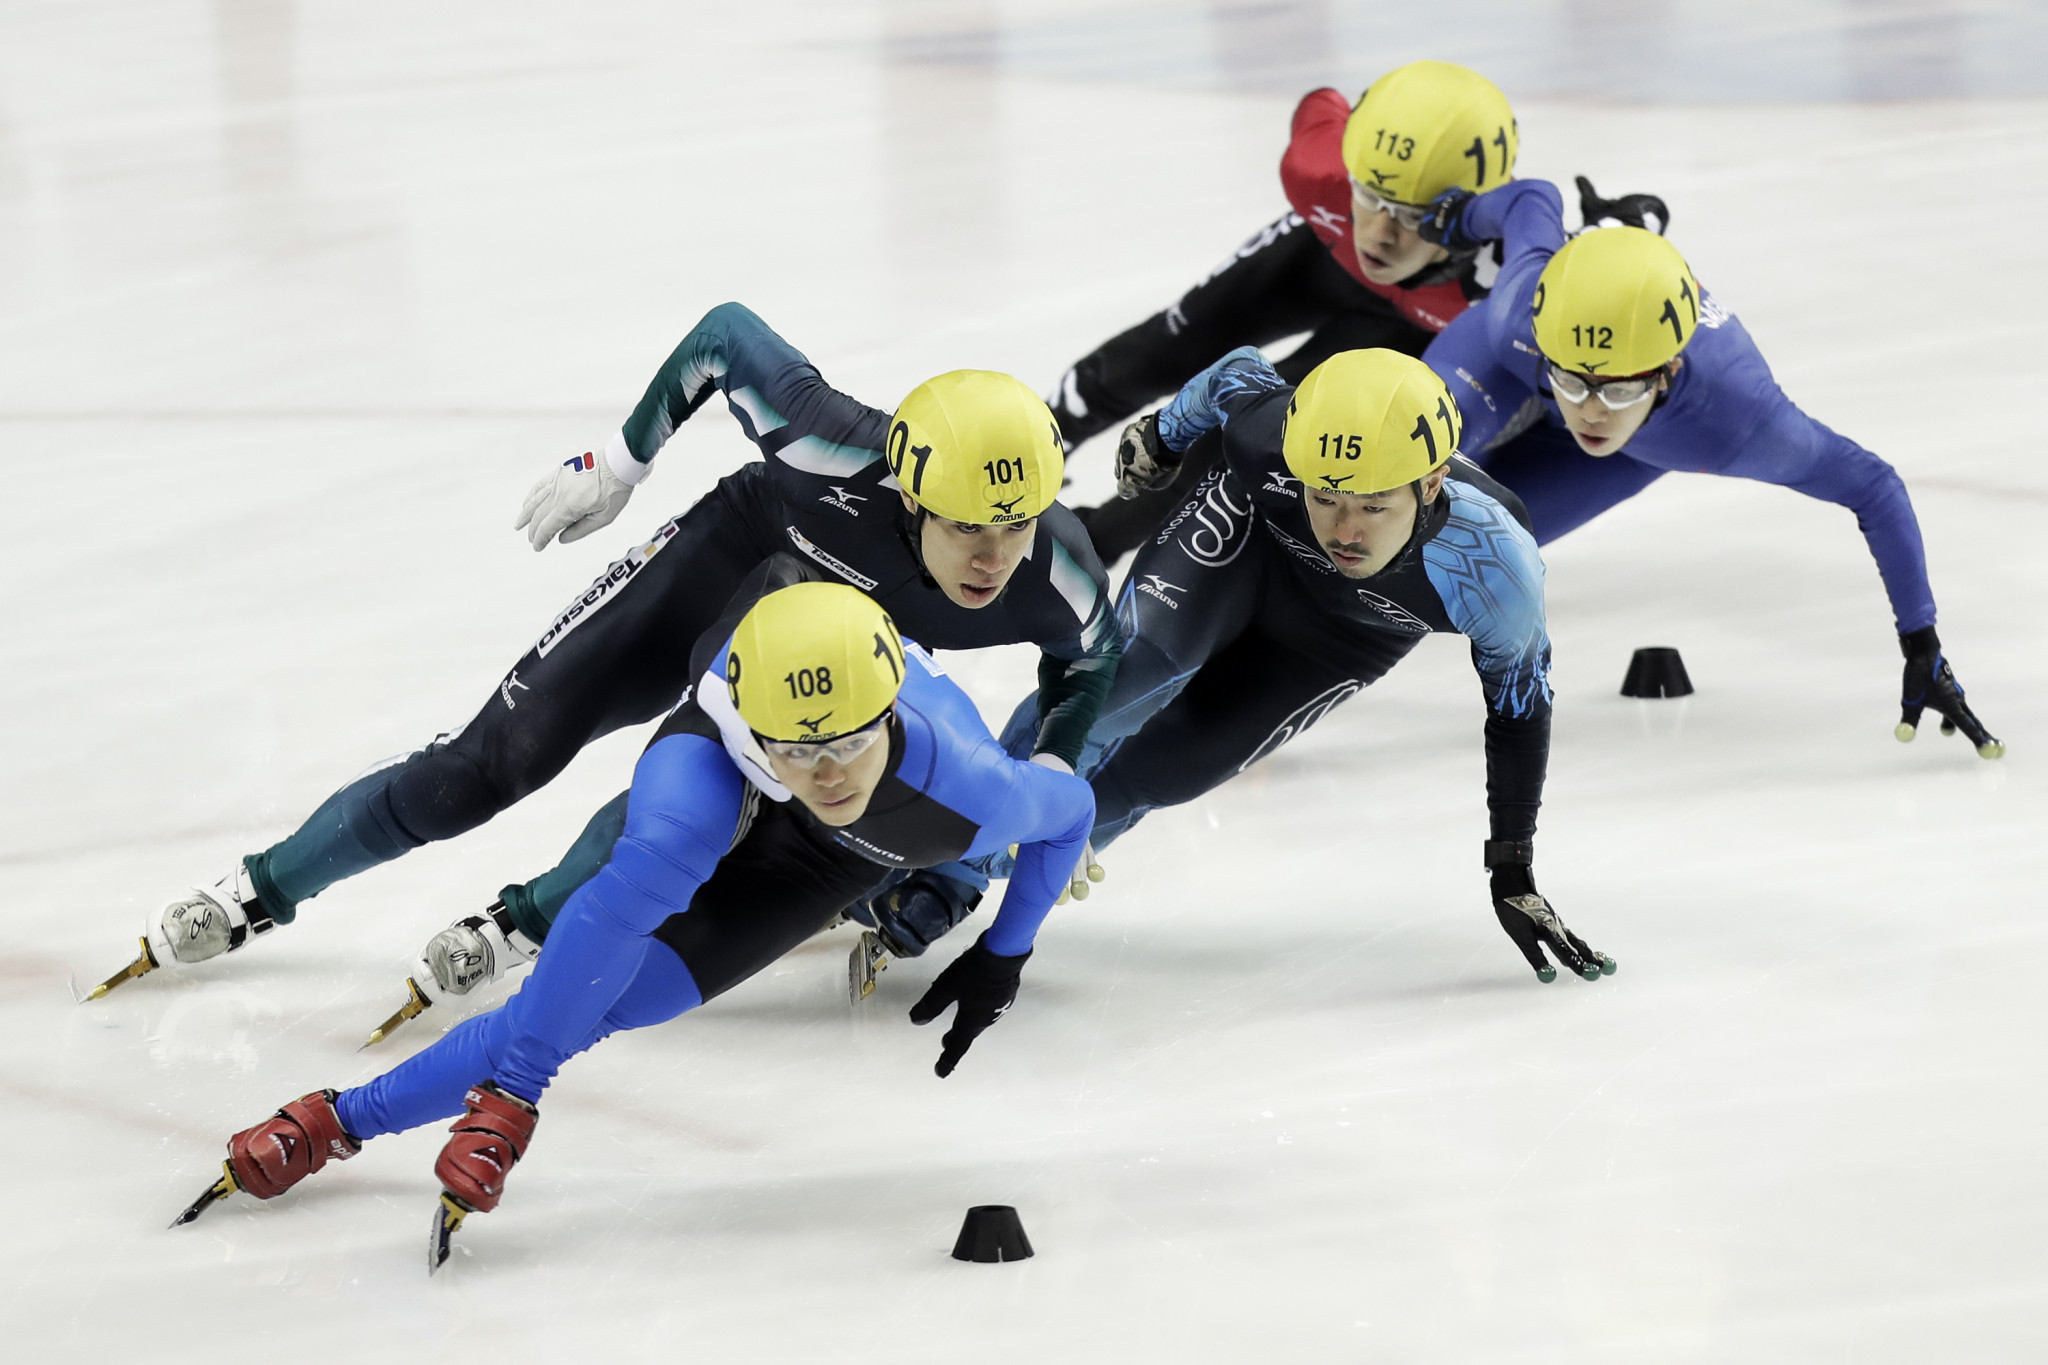 Shun Saito, far right, is among he latest athletes to benefit from the Asnavi scheme ©Getty Images